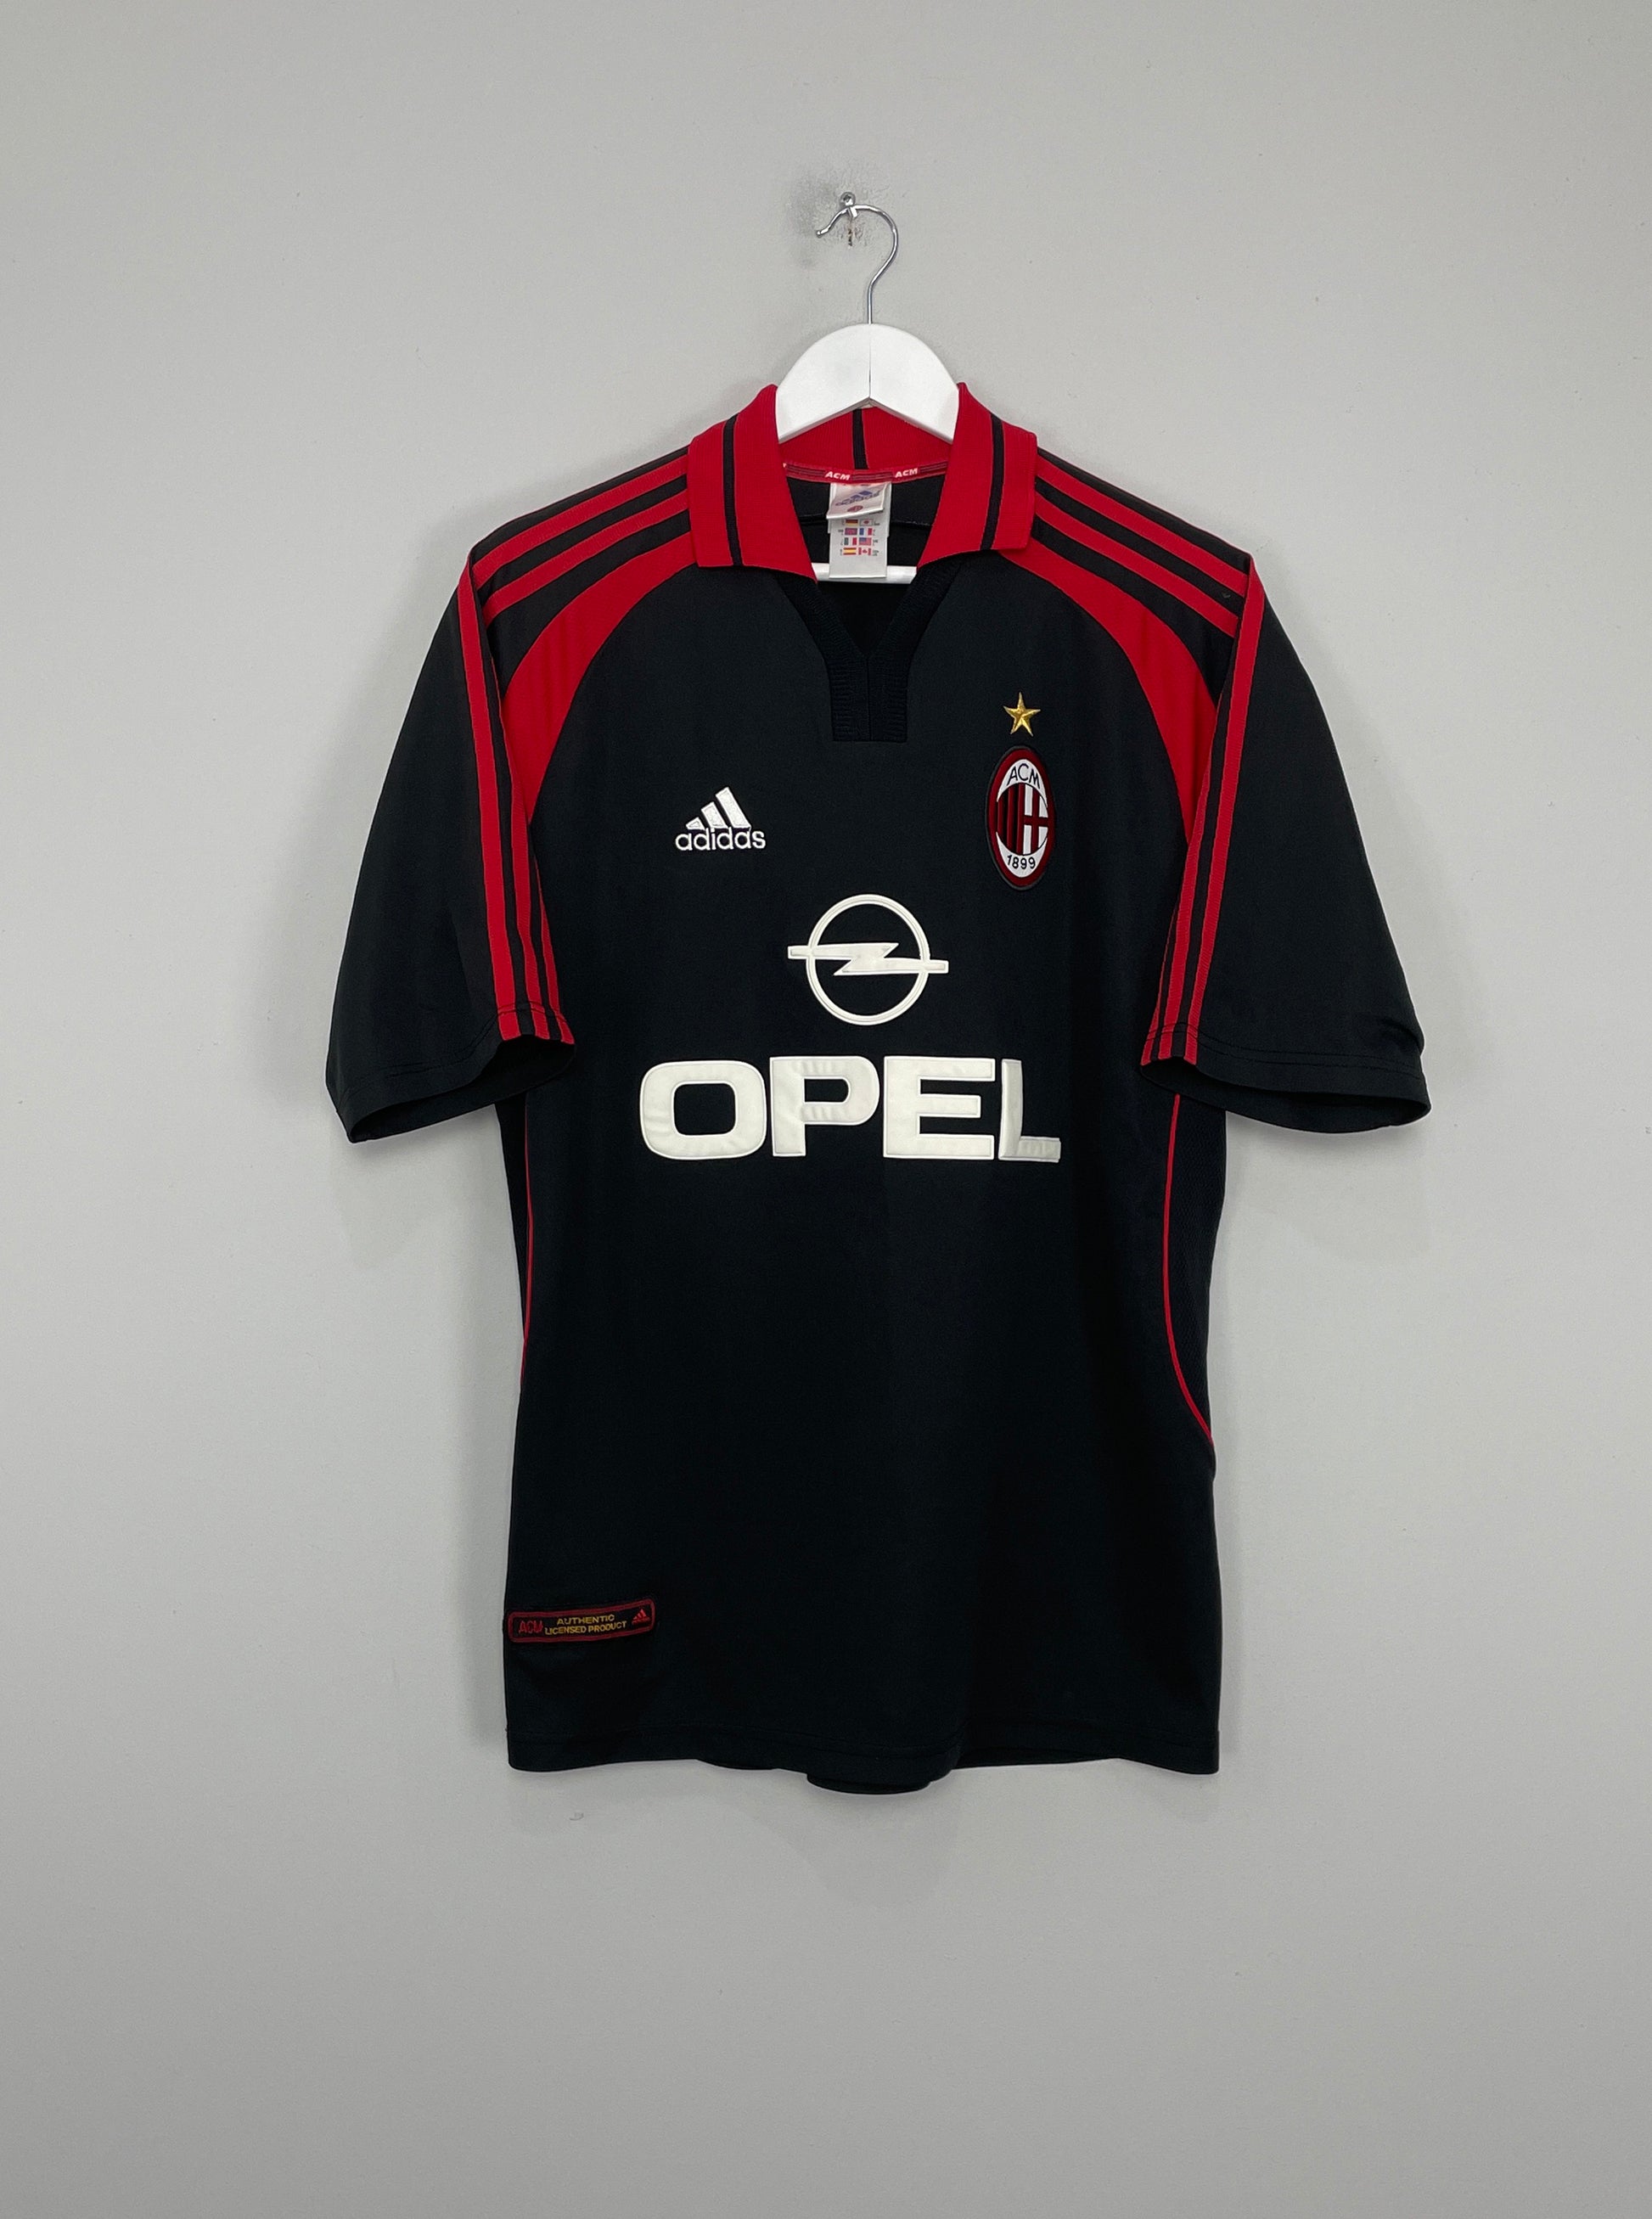 Image of the AC Milan shirt from the 2000/01 season